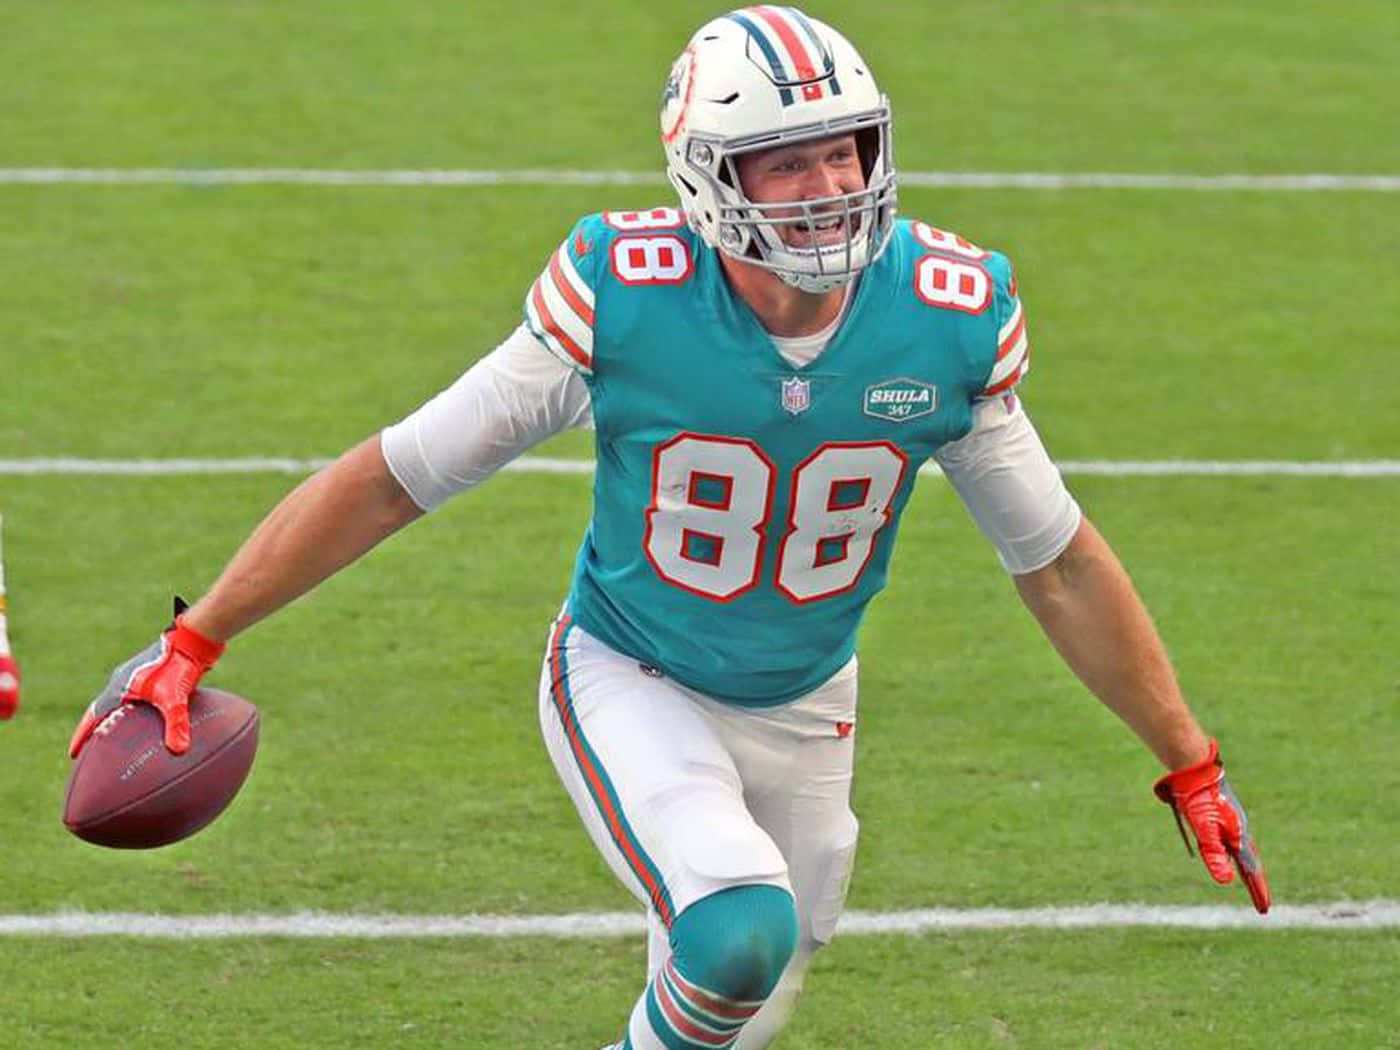 Miami Dolphins Player In Action Wallpaper